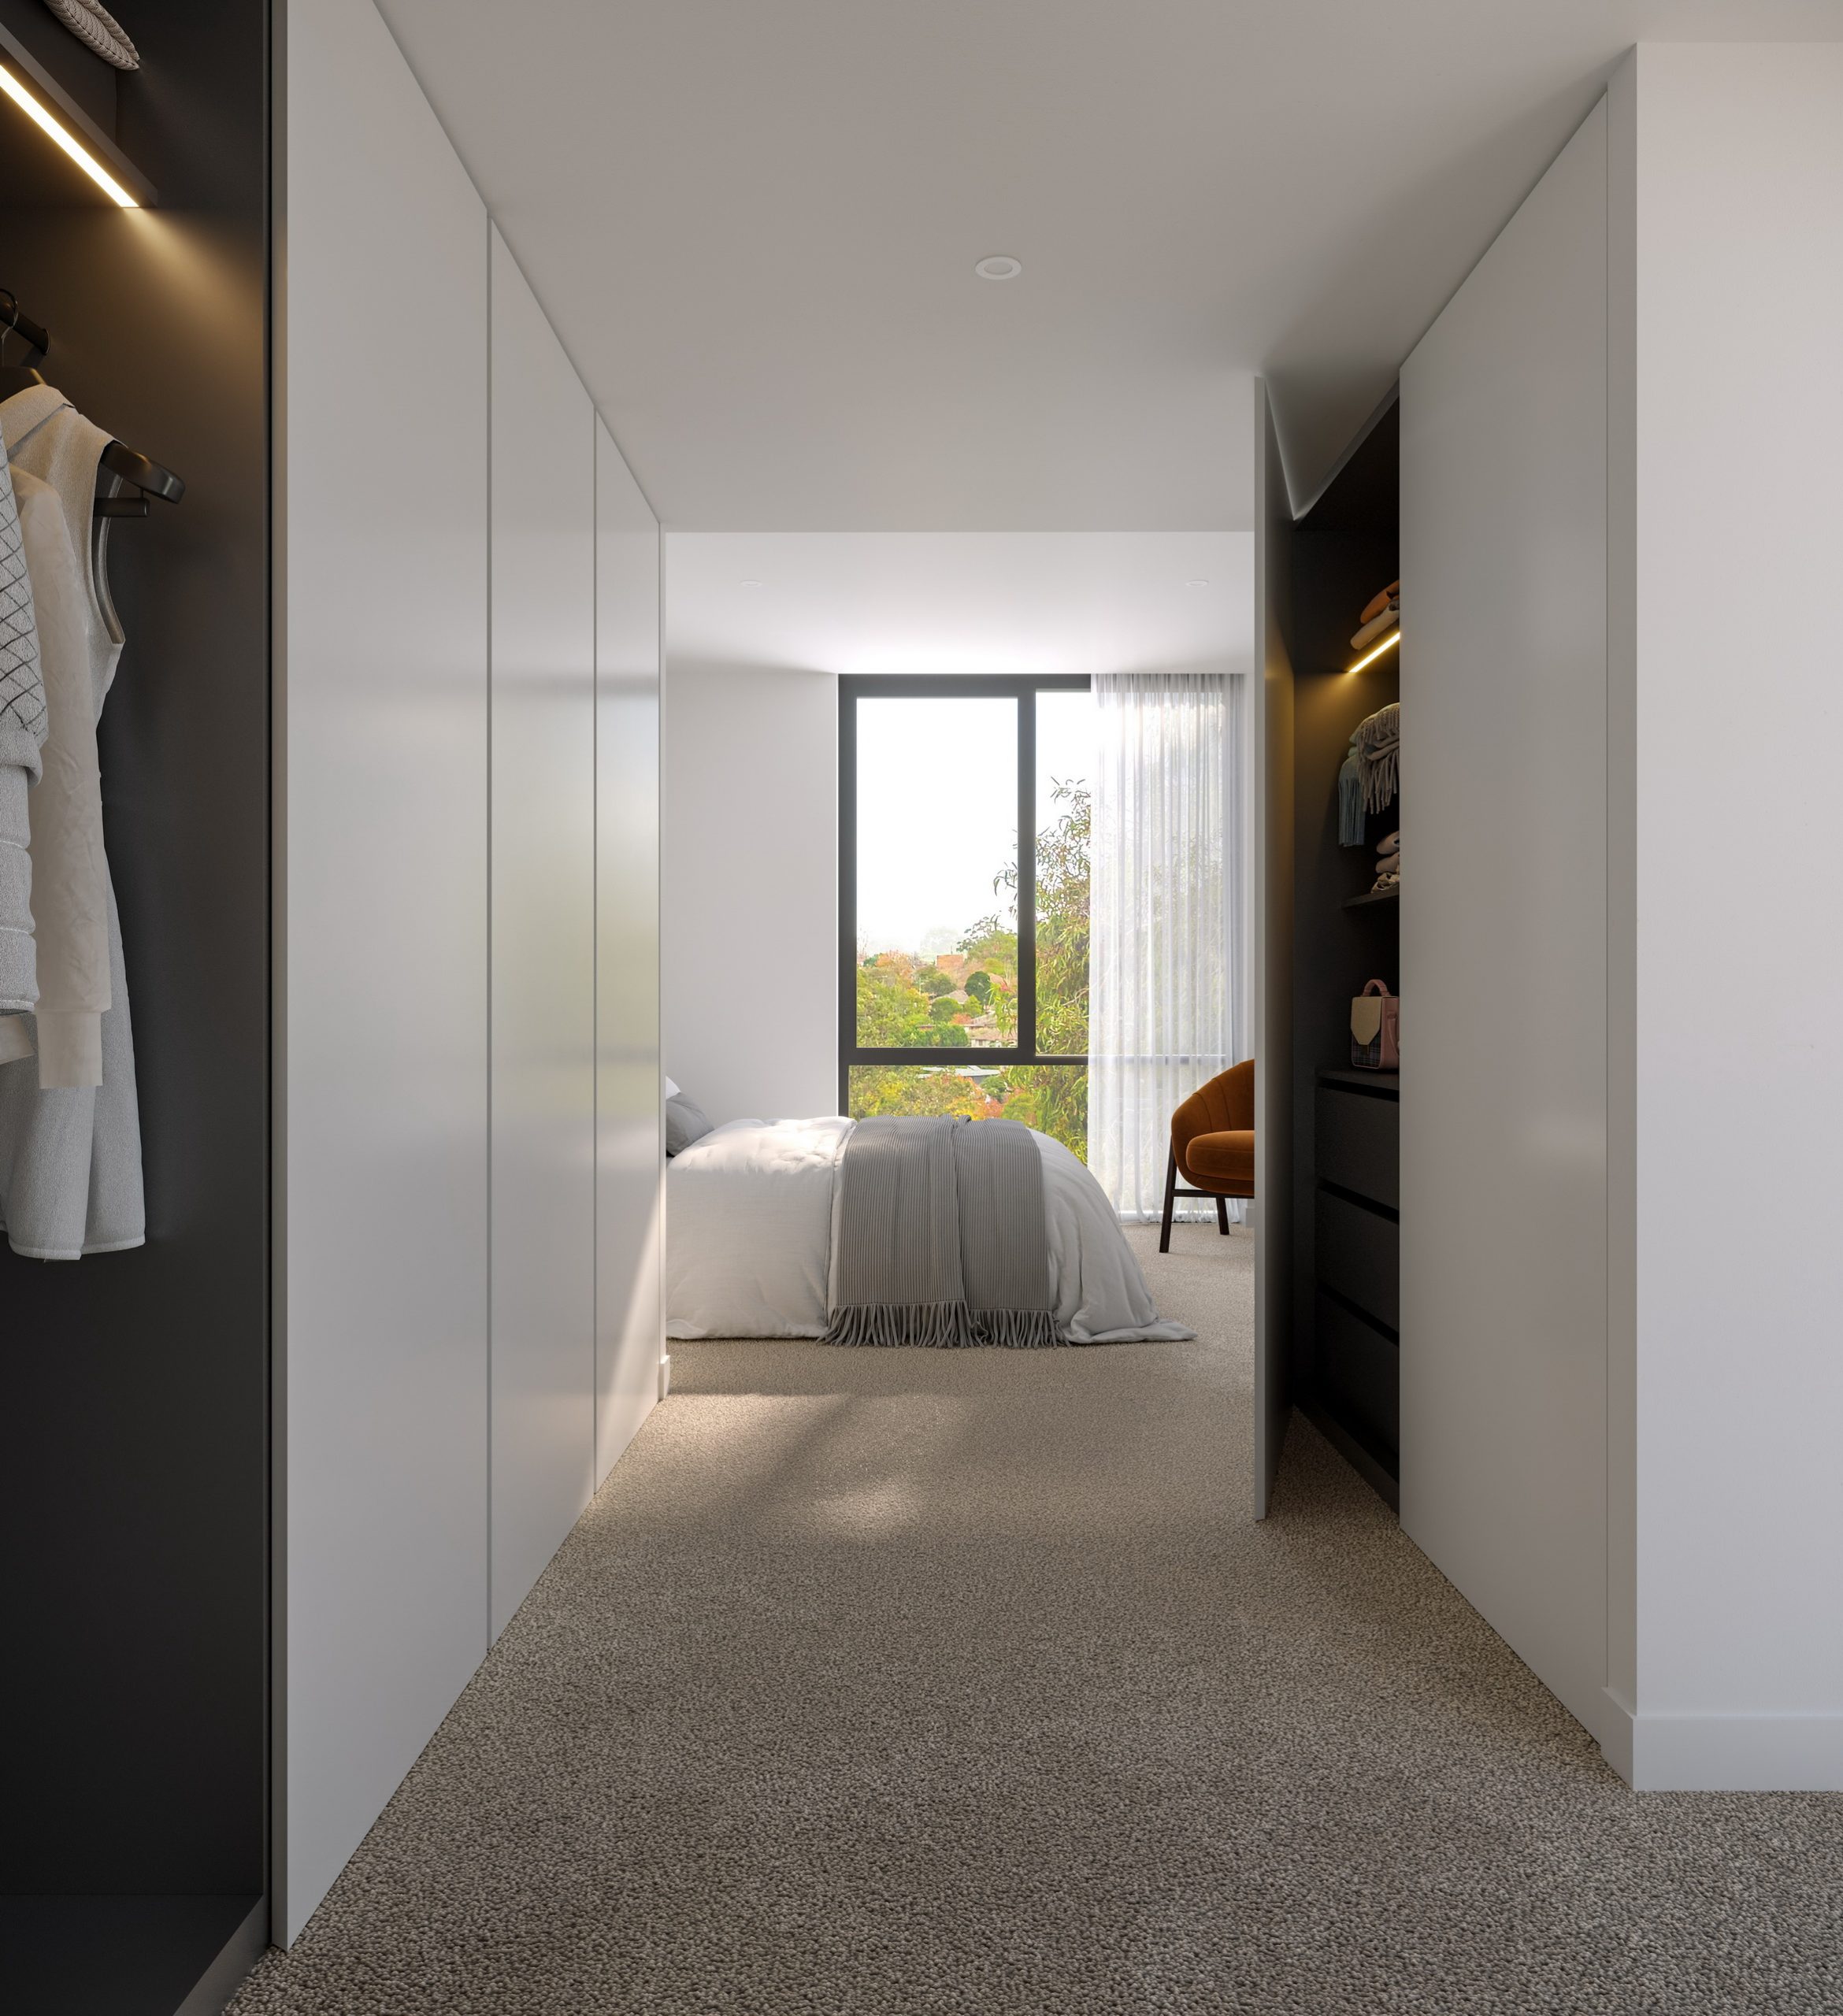 fkd-studio-render-architecture-image-the-grounds-interior-ivanhoe-residential